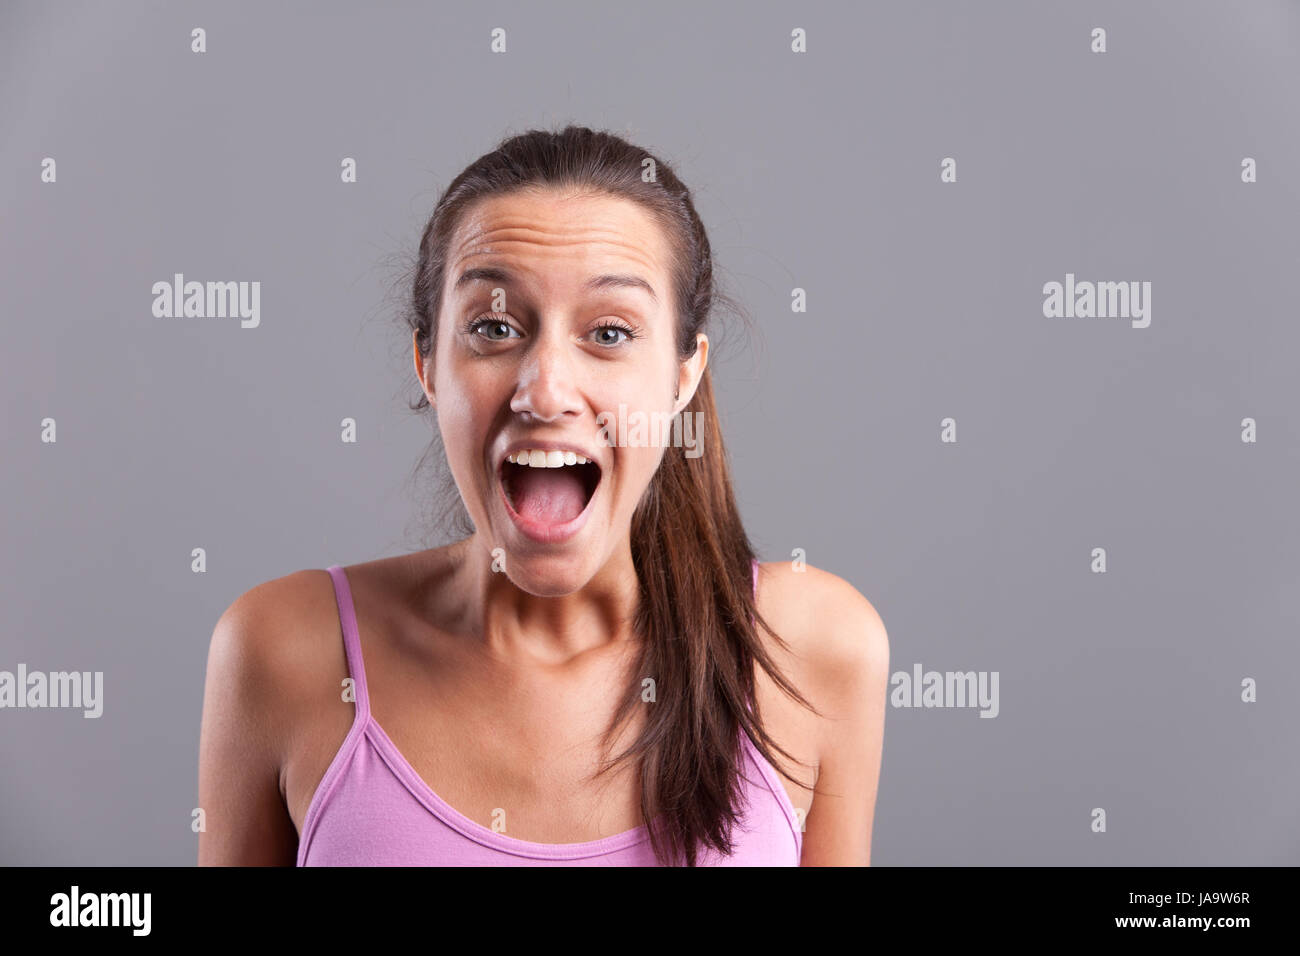 laugh, laughs, laughing, twit, giggle, smile, smiling, laughter, laughingly, Stock Photo